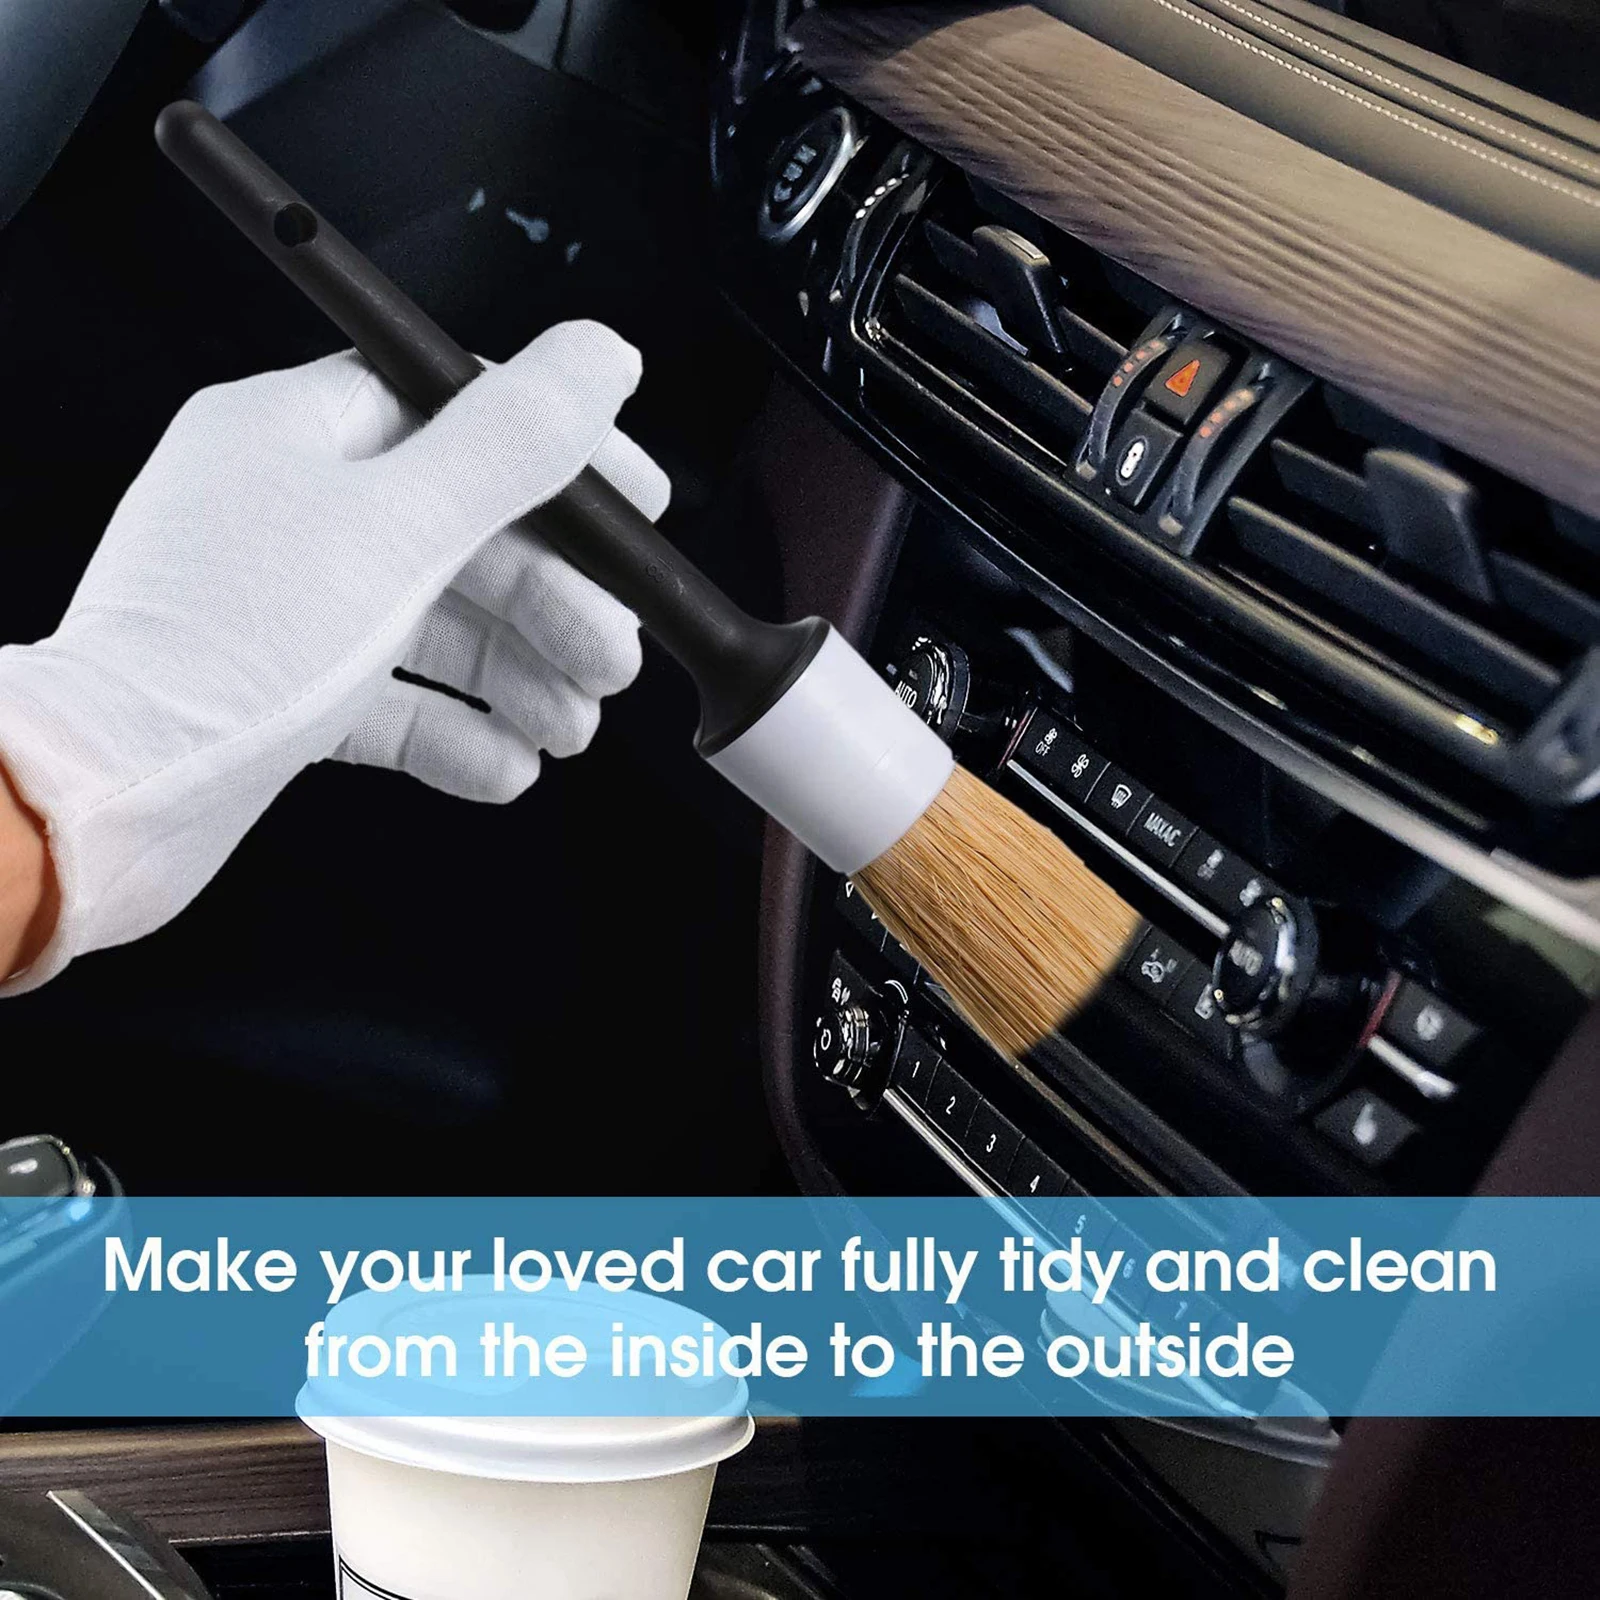 cleaning leather seats 5/ 10pcs Car Detailing Brush Set Car Cleaning Brushes Cleaning Wheel Detail Brush Detailing Brush Set Air Vents Brush Sponge Wax turtle wax ice